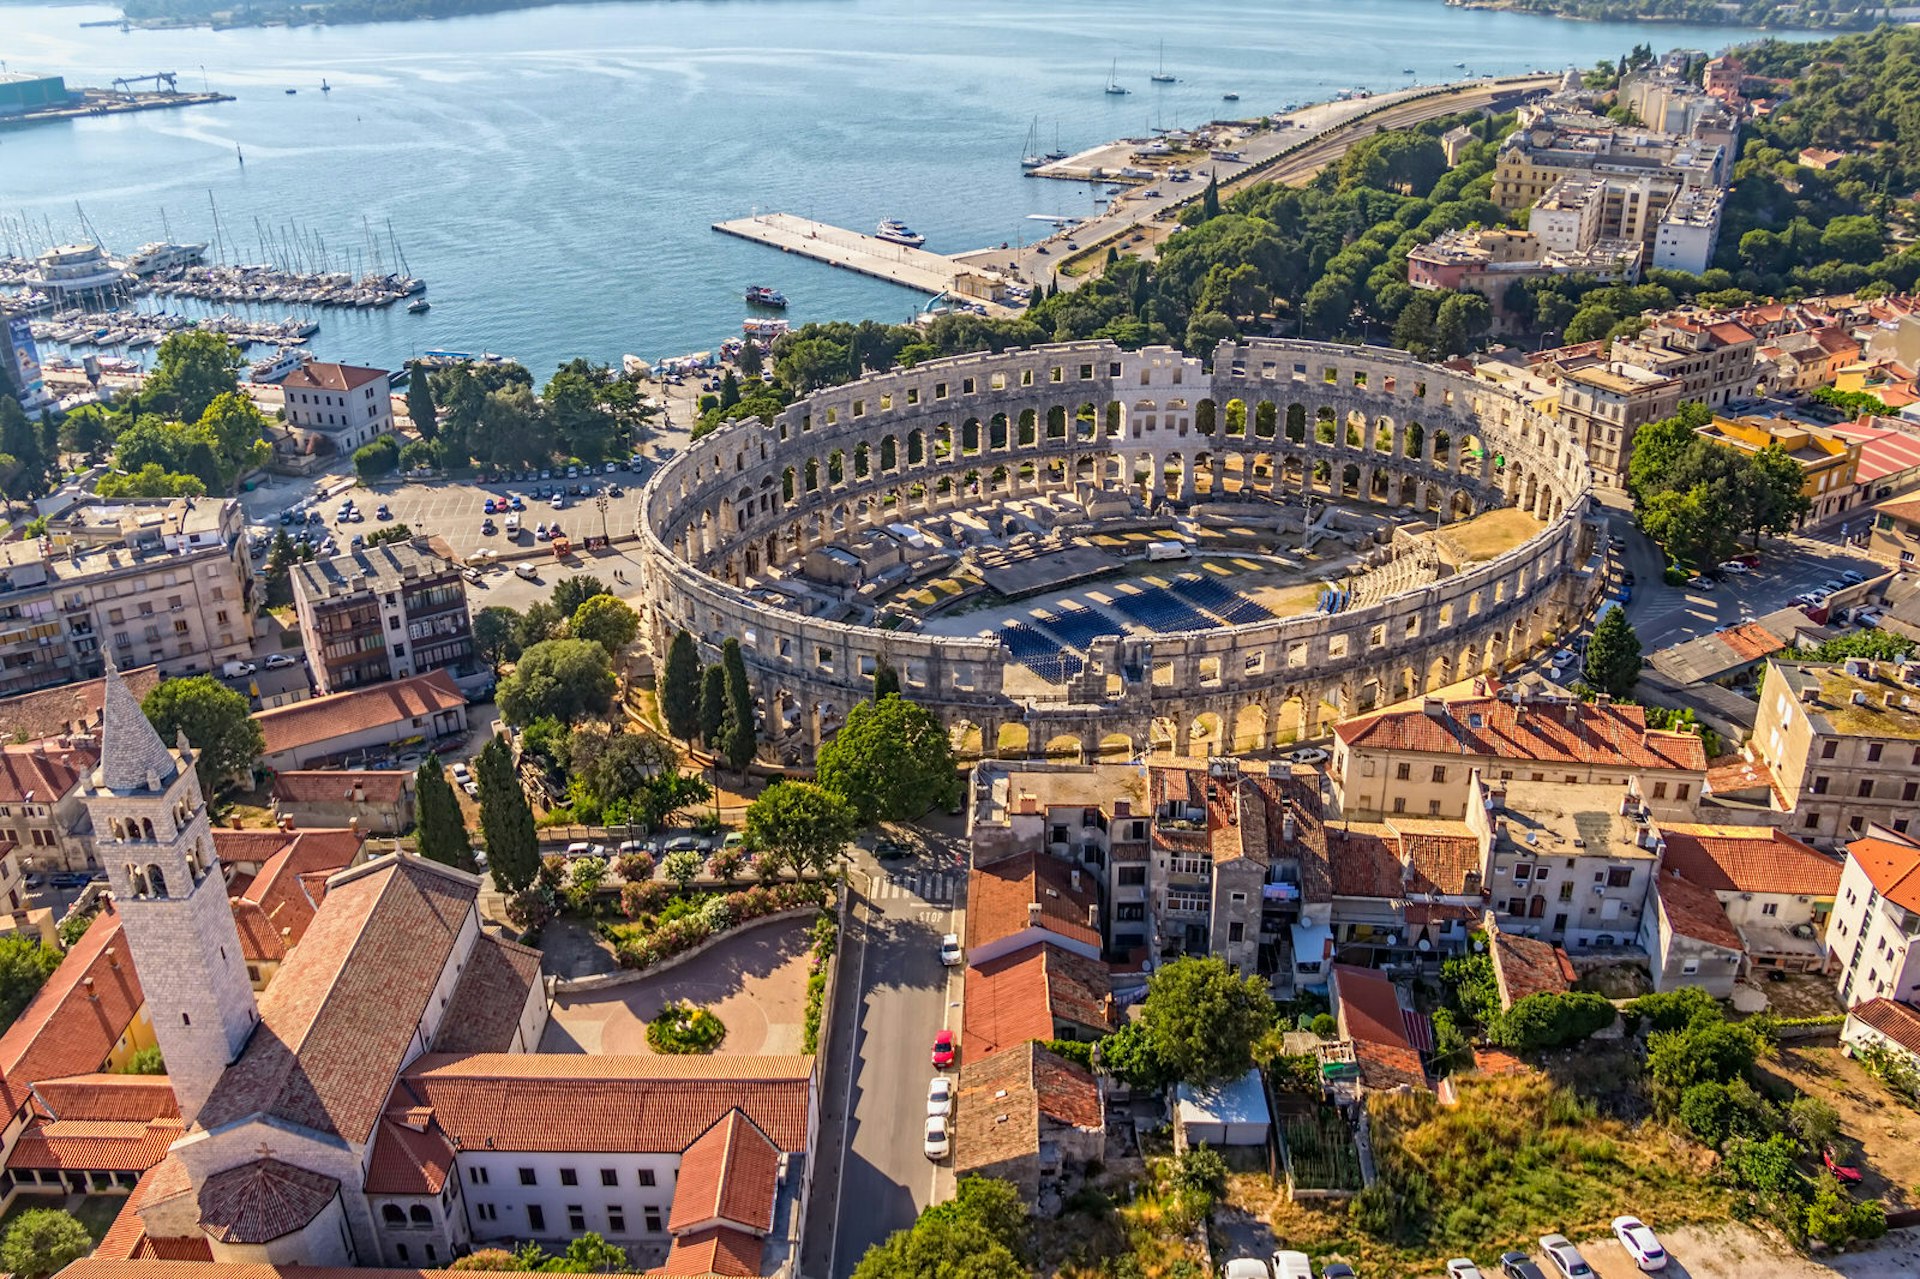 An aerial view of Pula's remarkably intact Roman Amphitheatre, beside the sea